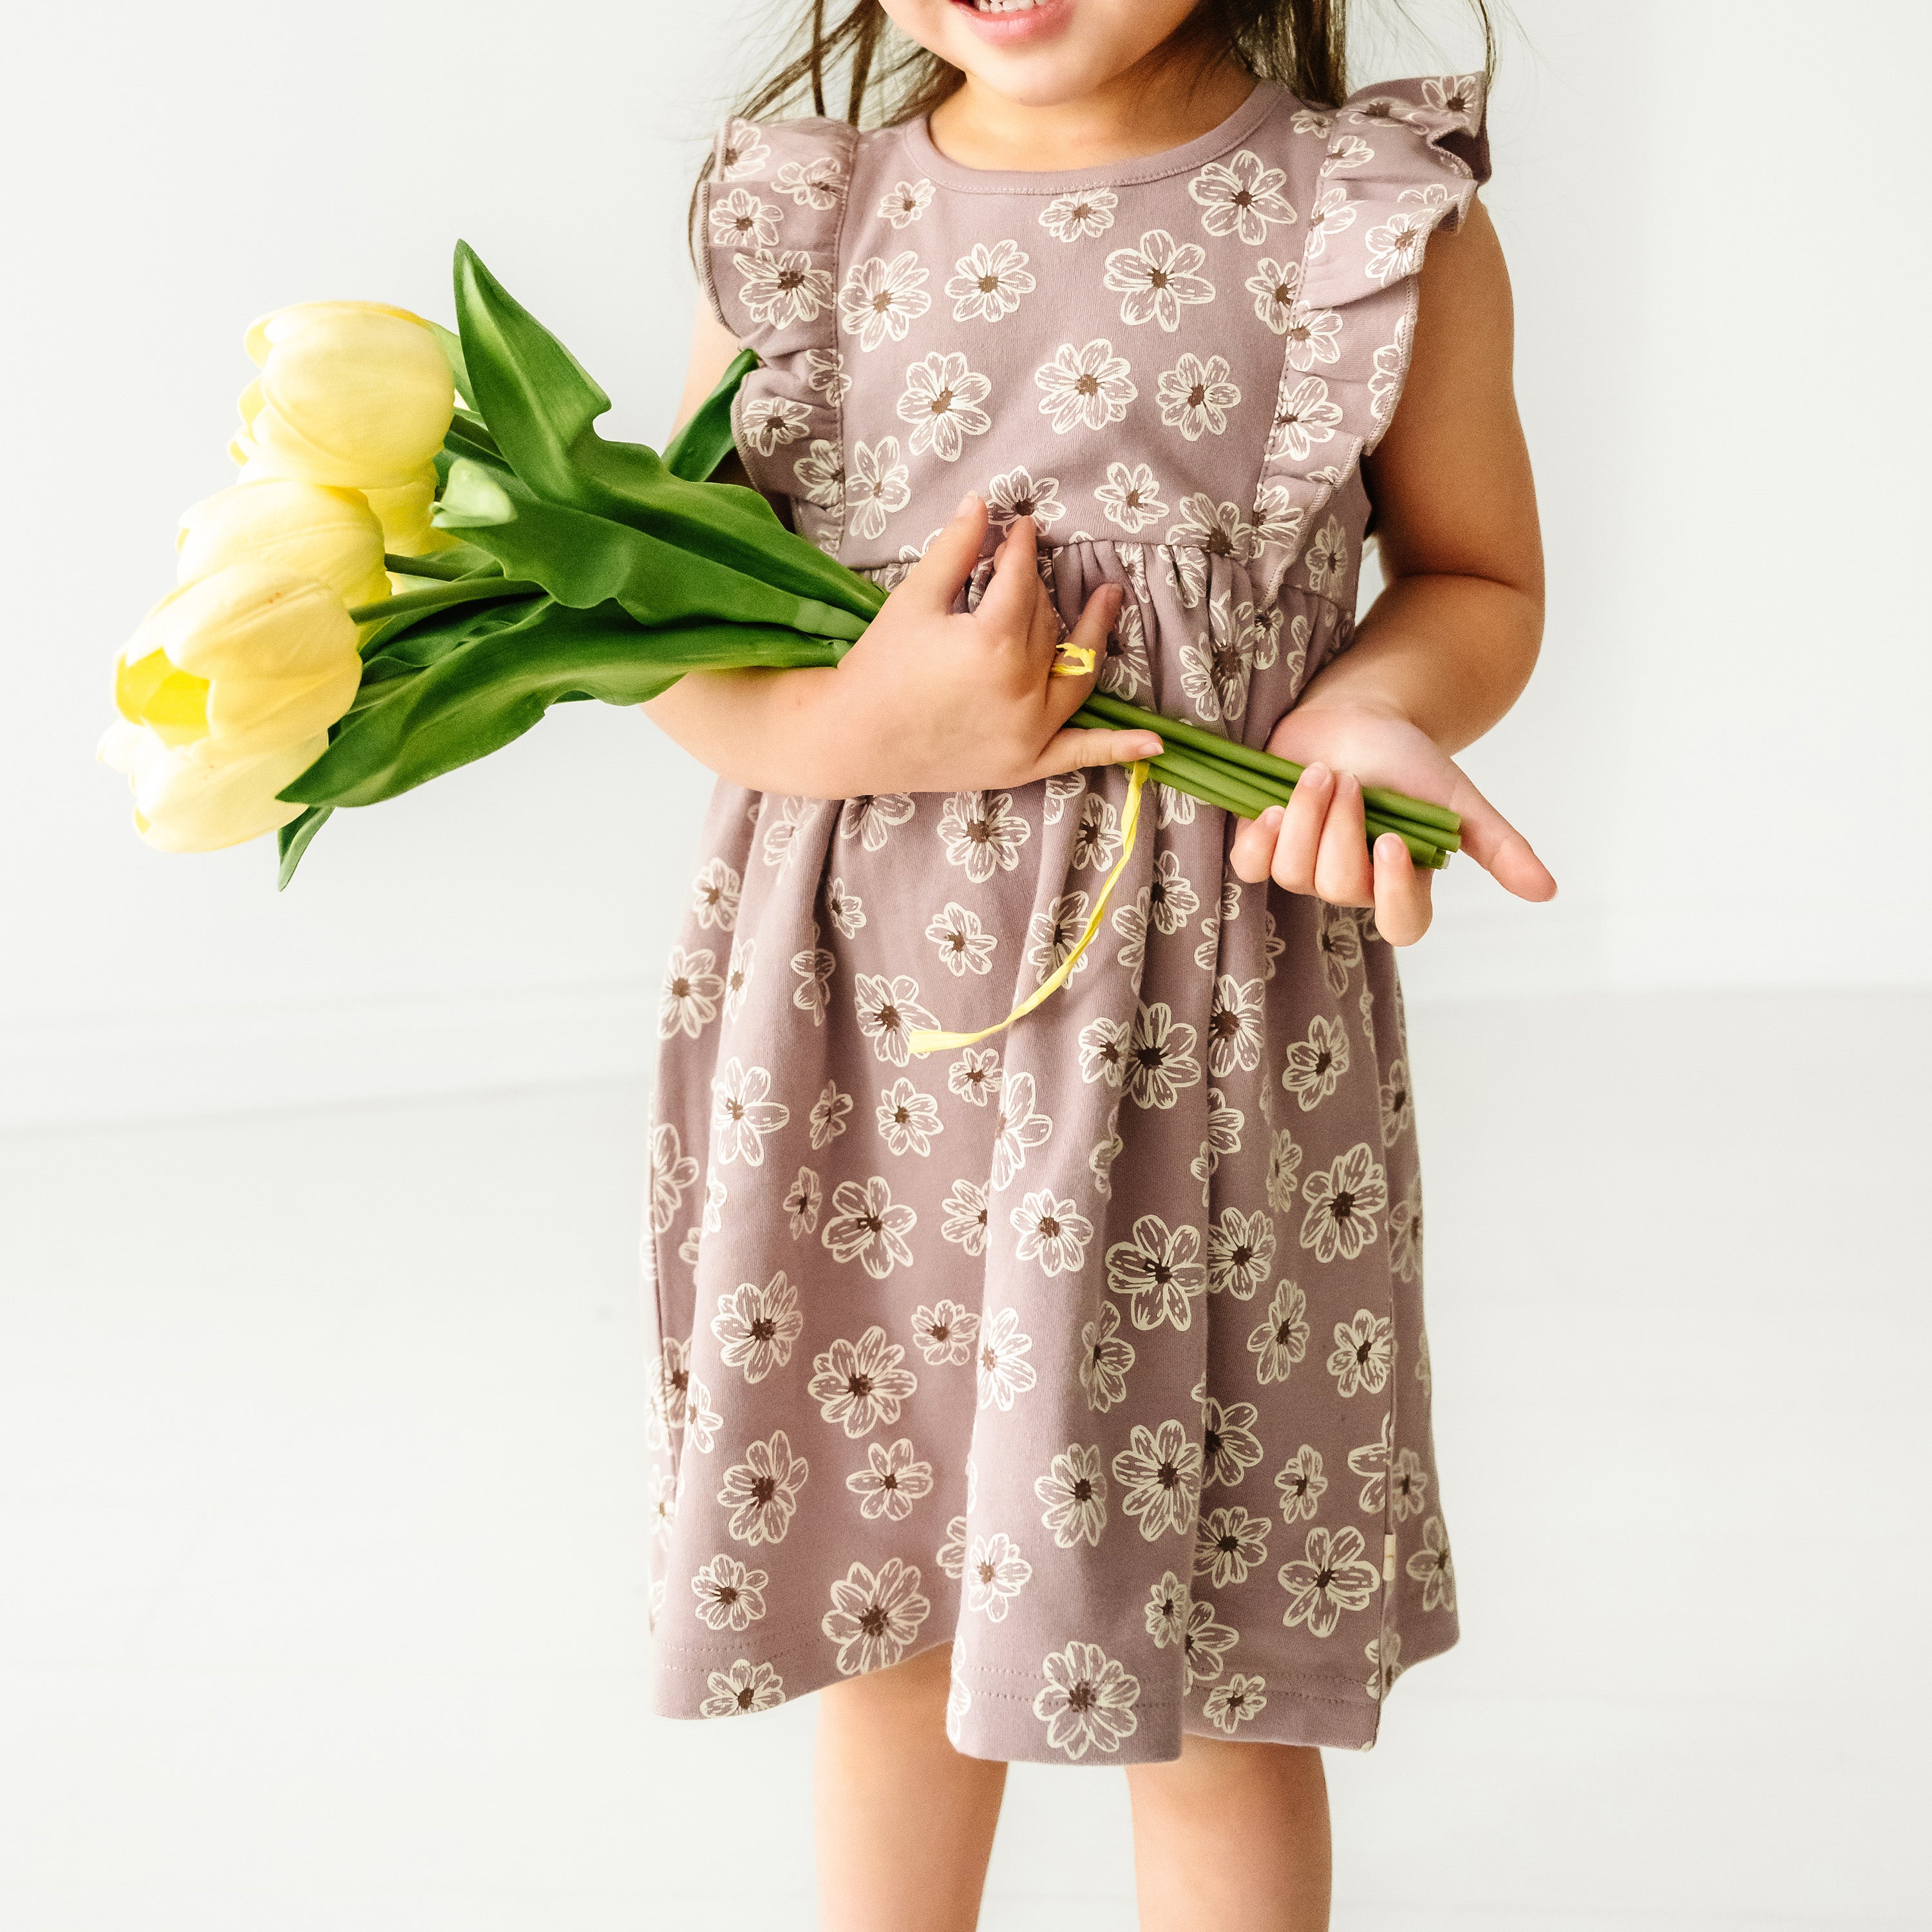 A young toddler in an Organic Flutter Dress - Daisies by Makemake Organics, holding a bouquet of yellow tulips, smiling while posing against a white background.